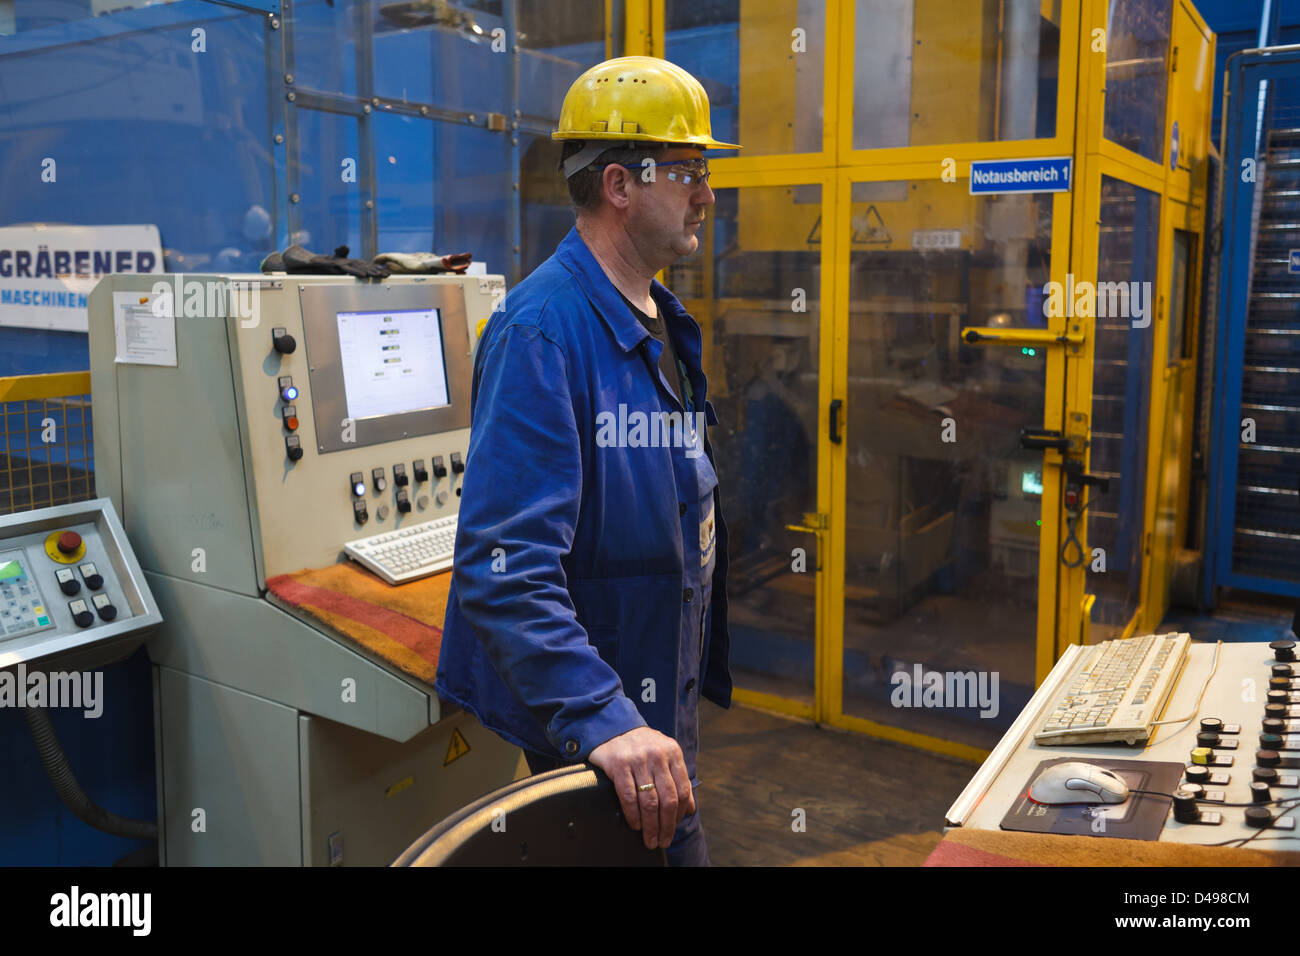 Papenburg, Germany, Meyer Werft GmbH, an employee of the Meyer Werft shipyard in the halls Stock Photo